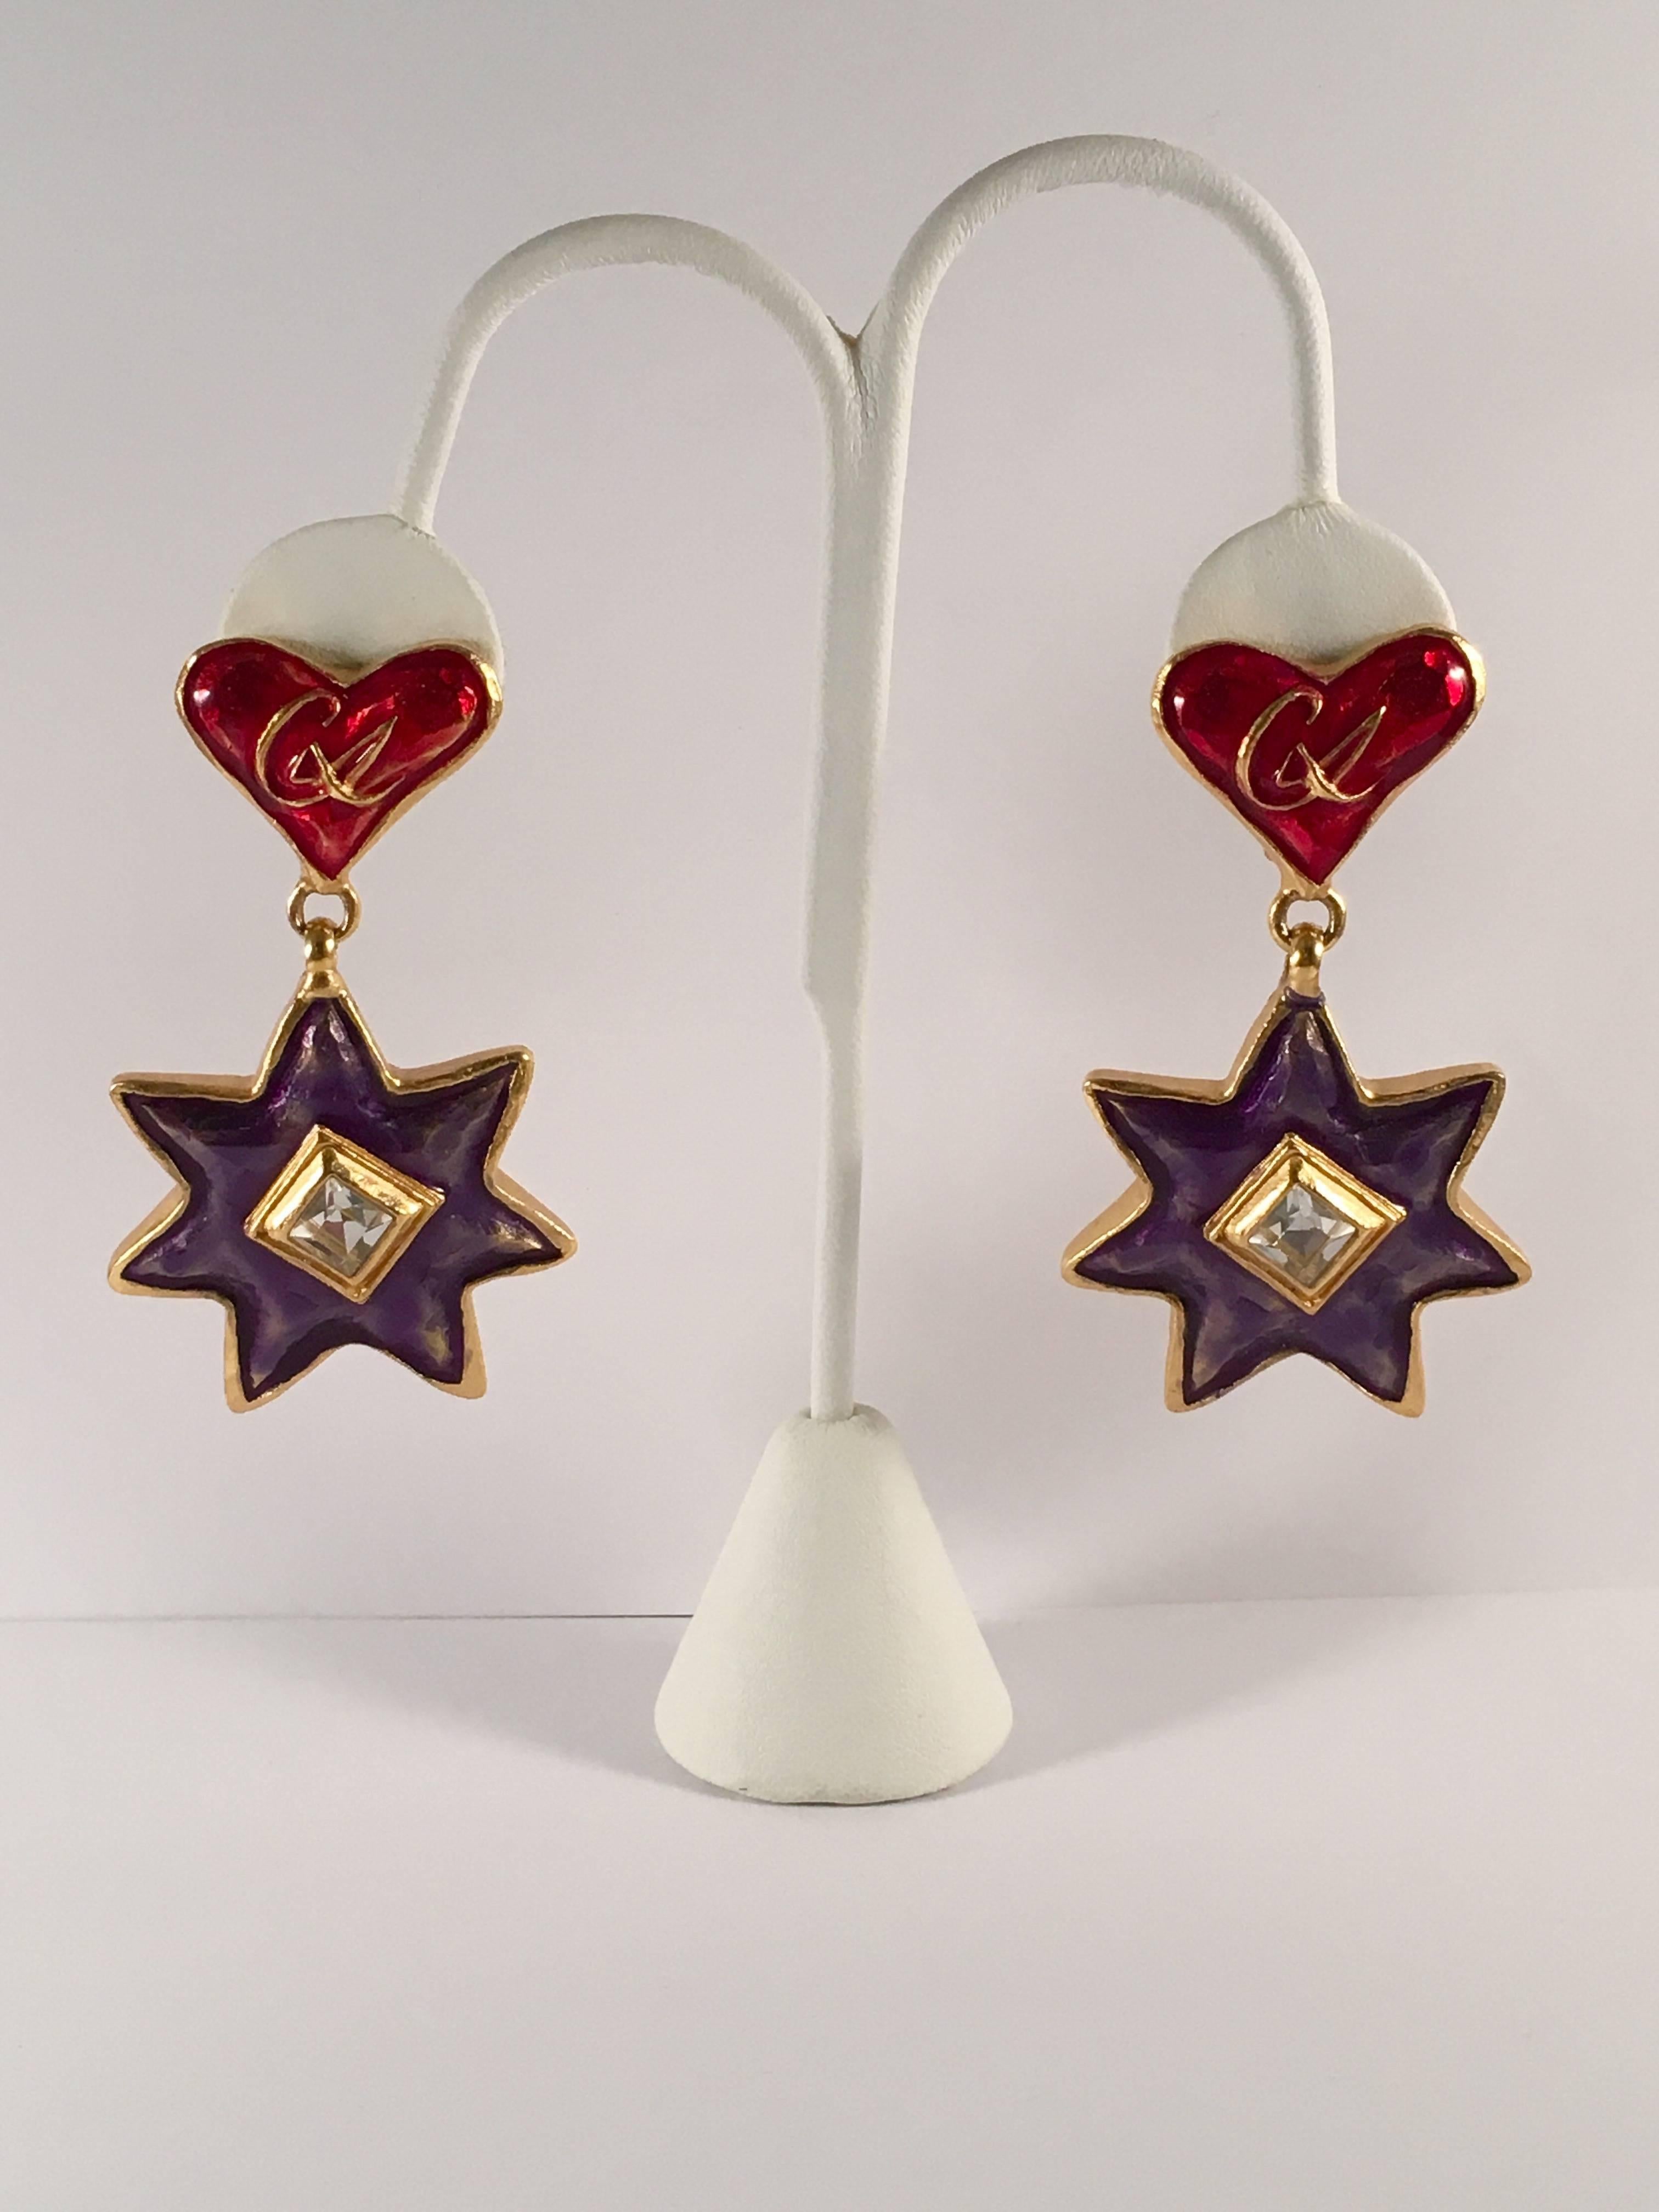 This is a pair of Christian LaCroix clip-on dangle earrings from the 1990s. The clip portion features an enameled red heart with a gold "CL" in the center. The dangle portion features a blue enameled star with a shiny clear rhinestone in